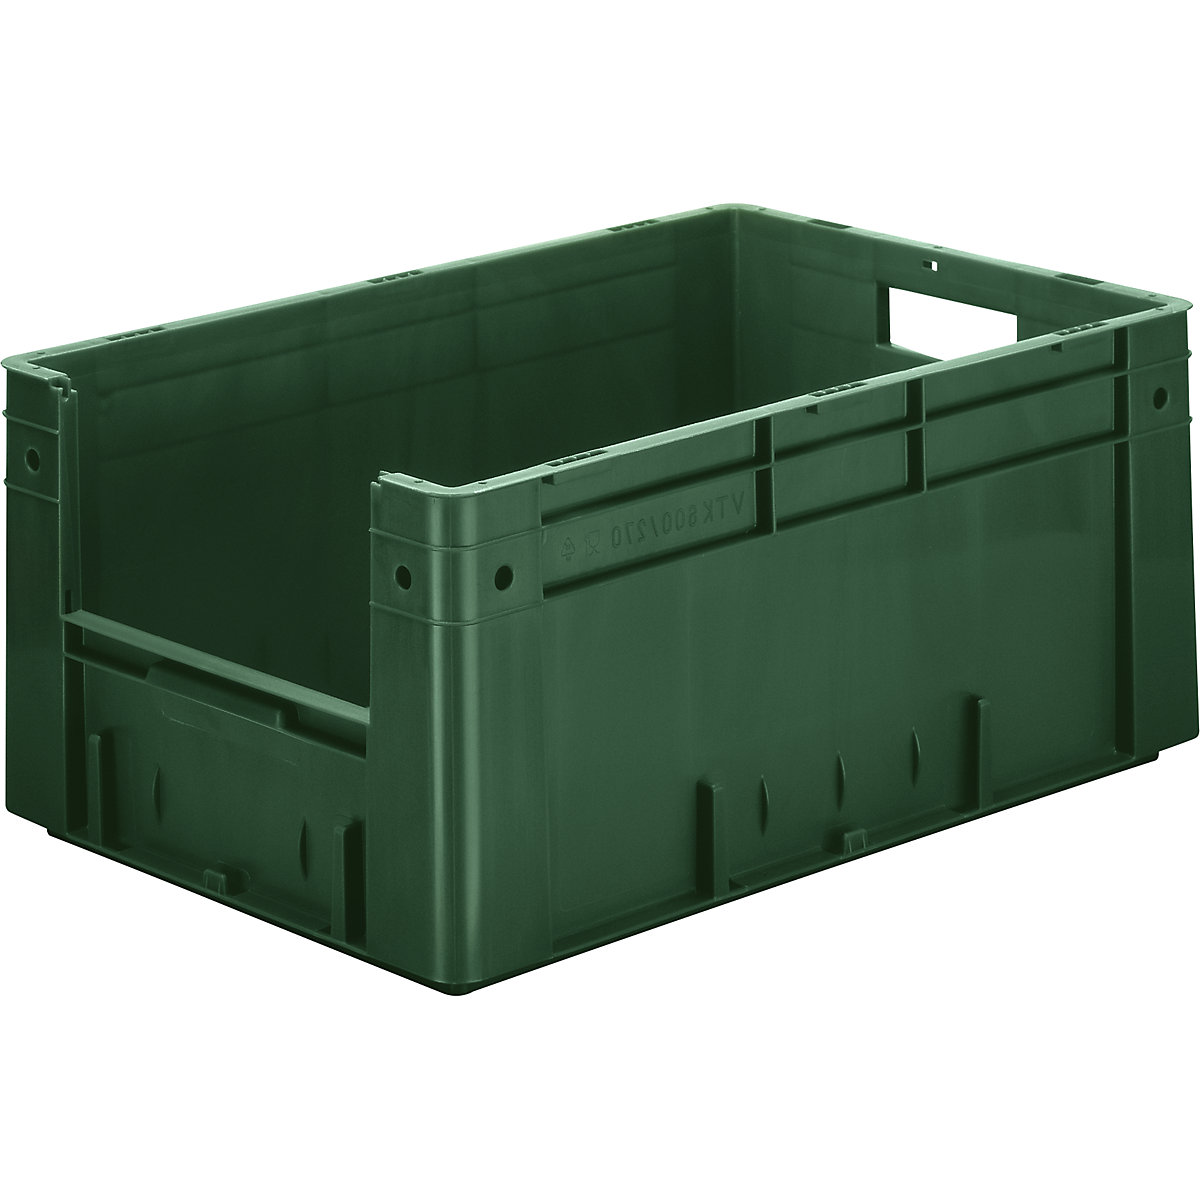 Euro stacking container, capacity 50 l, LxWxH 600 x 400 x 270 mm, pack of 2, green-3